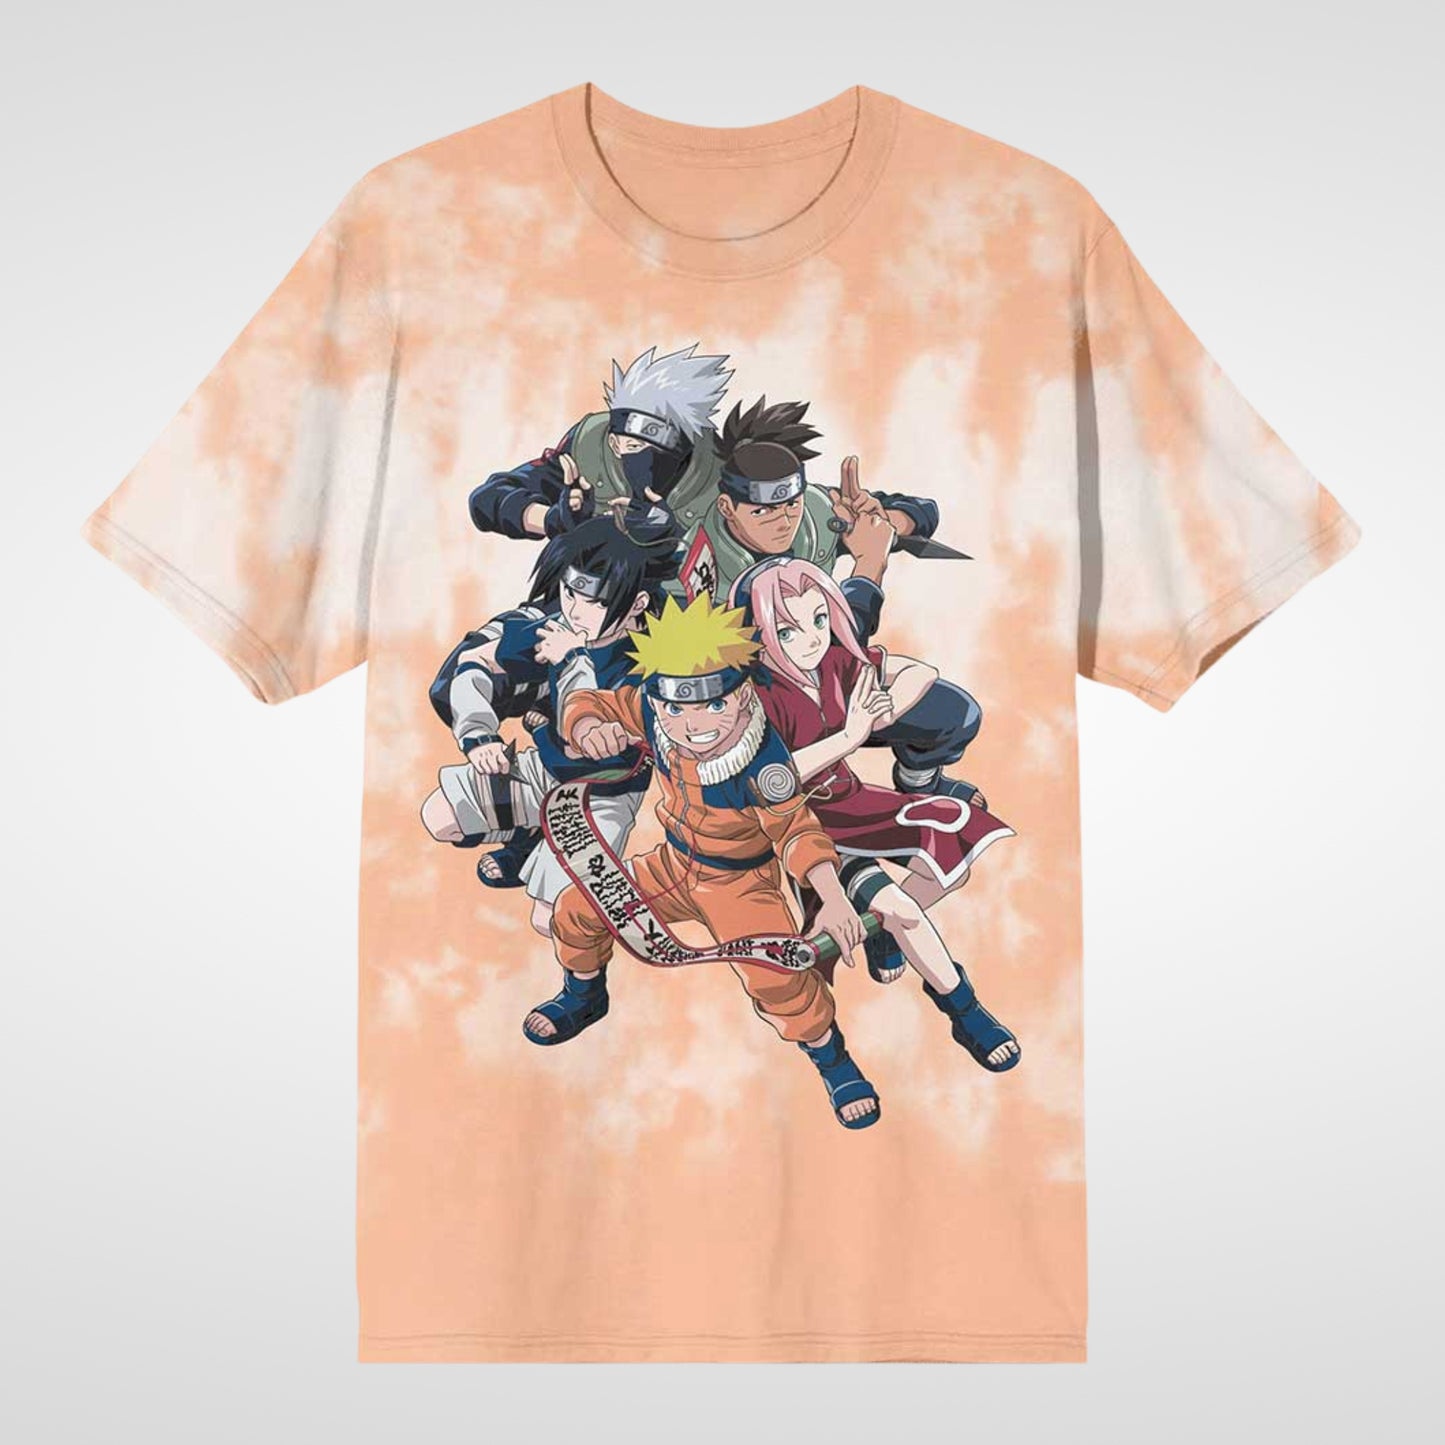 Load image into Gallery viewer, Naruto Leaf Village Group (Naruto Shippuden) Peach Tie Dye Unisex Shirt
